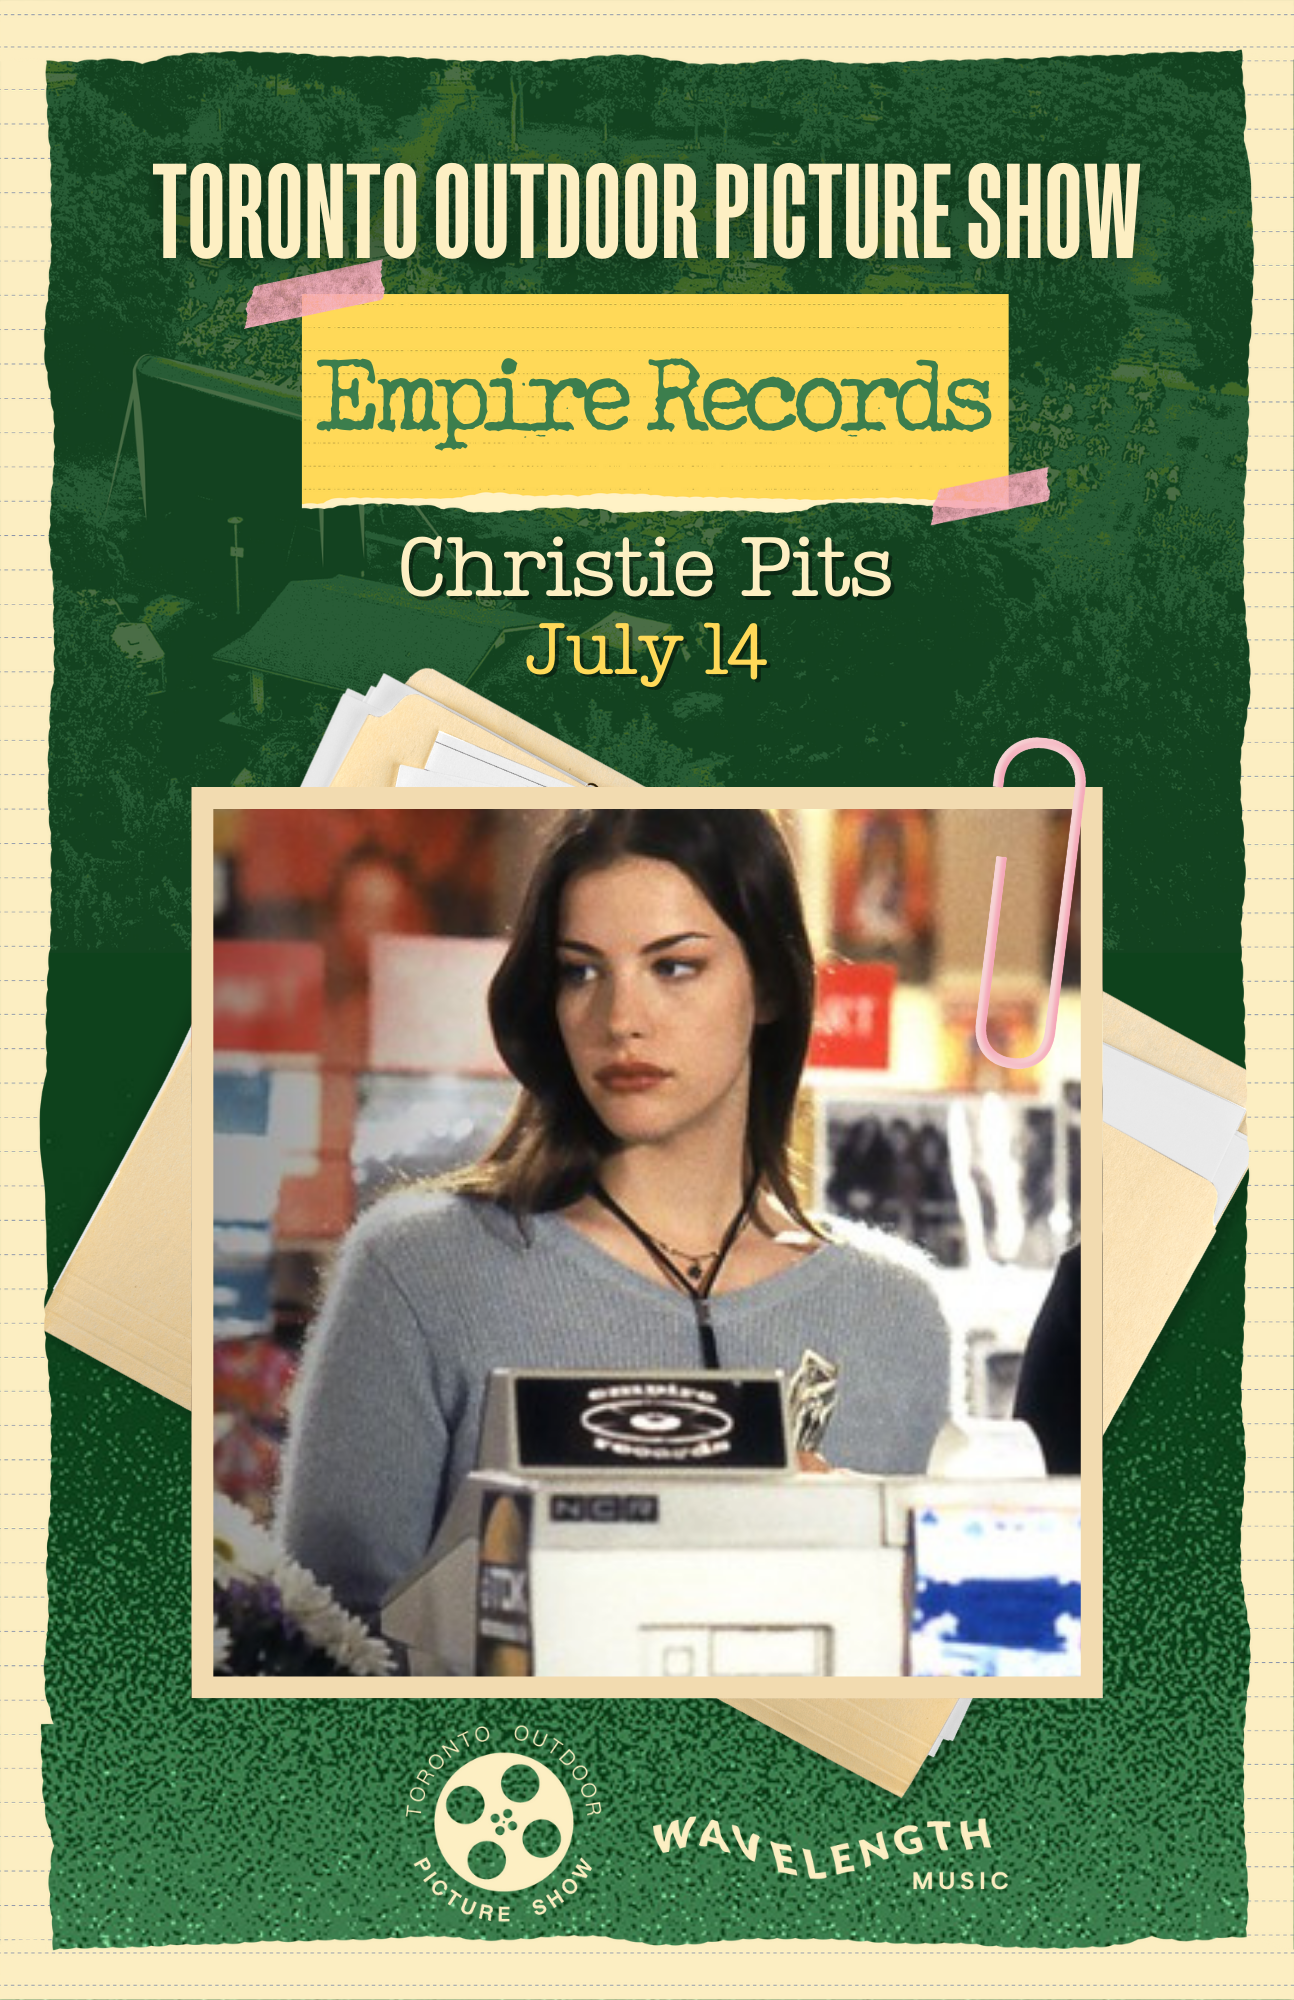 Empire Records: presented by TOPS